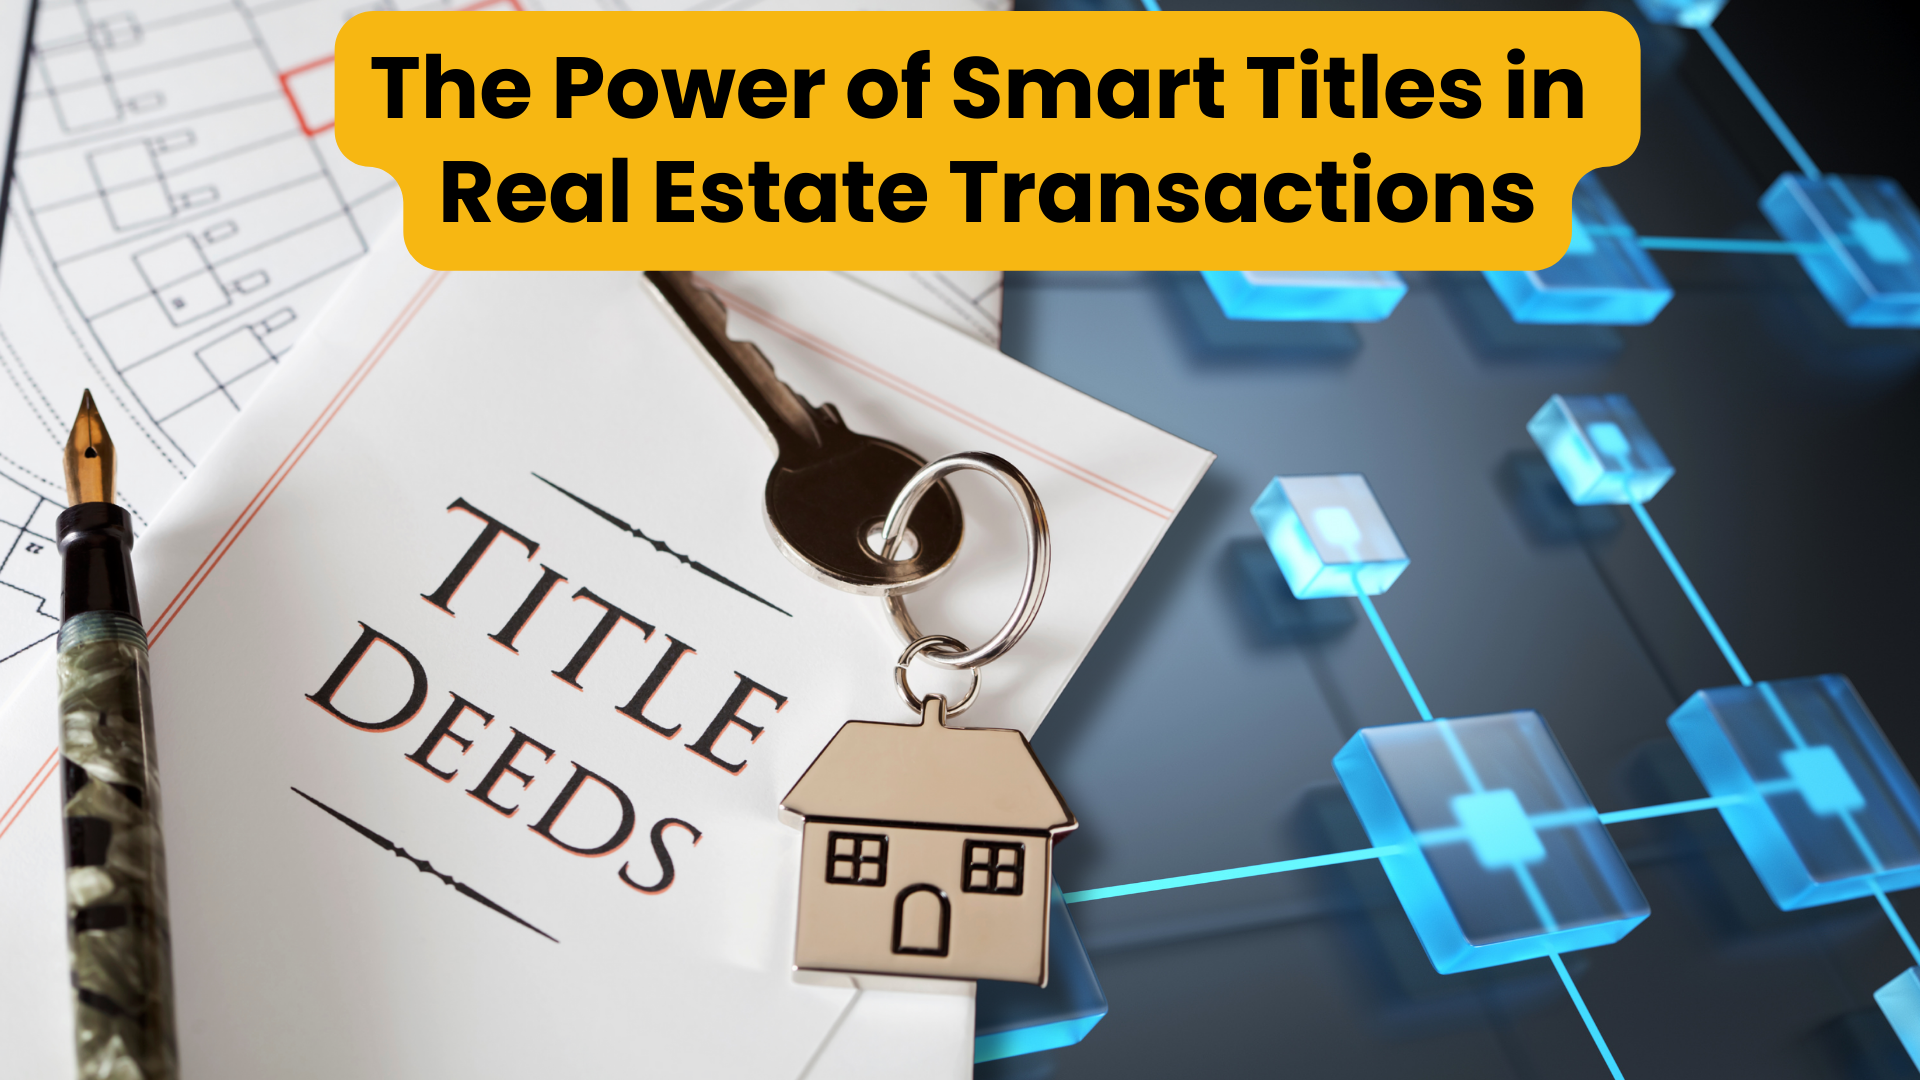 The Power of Smart Titles in Real Estate Transactions